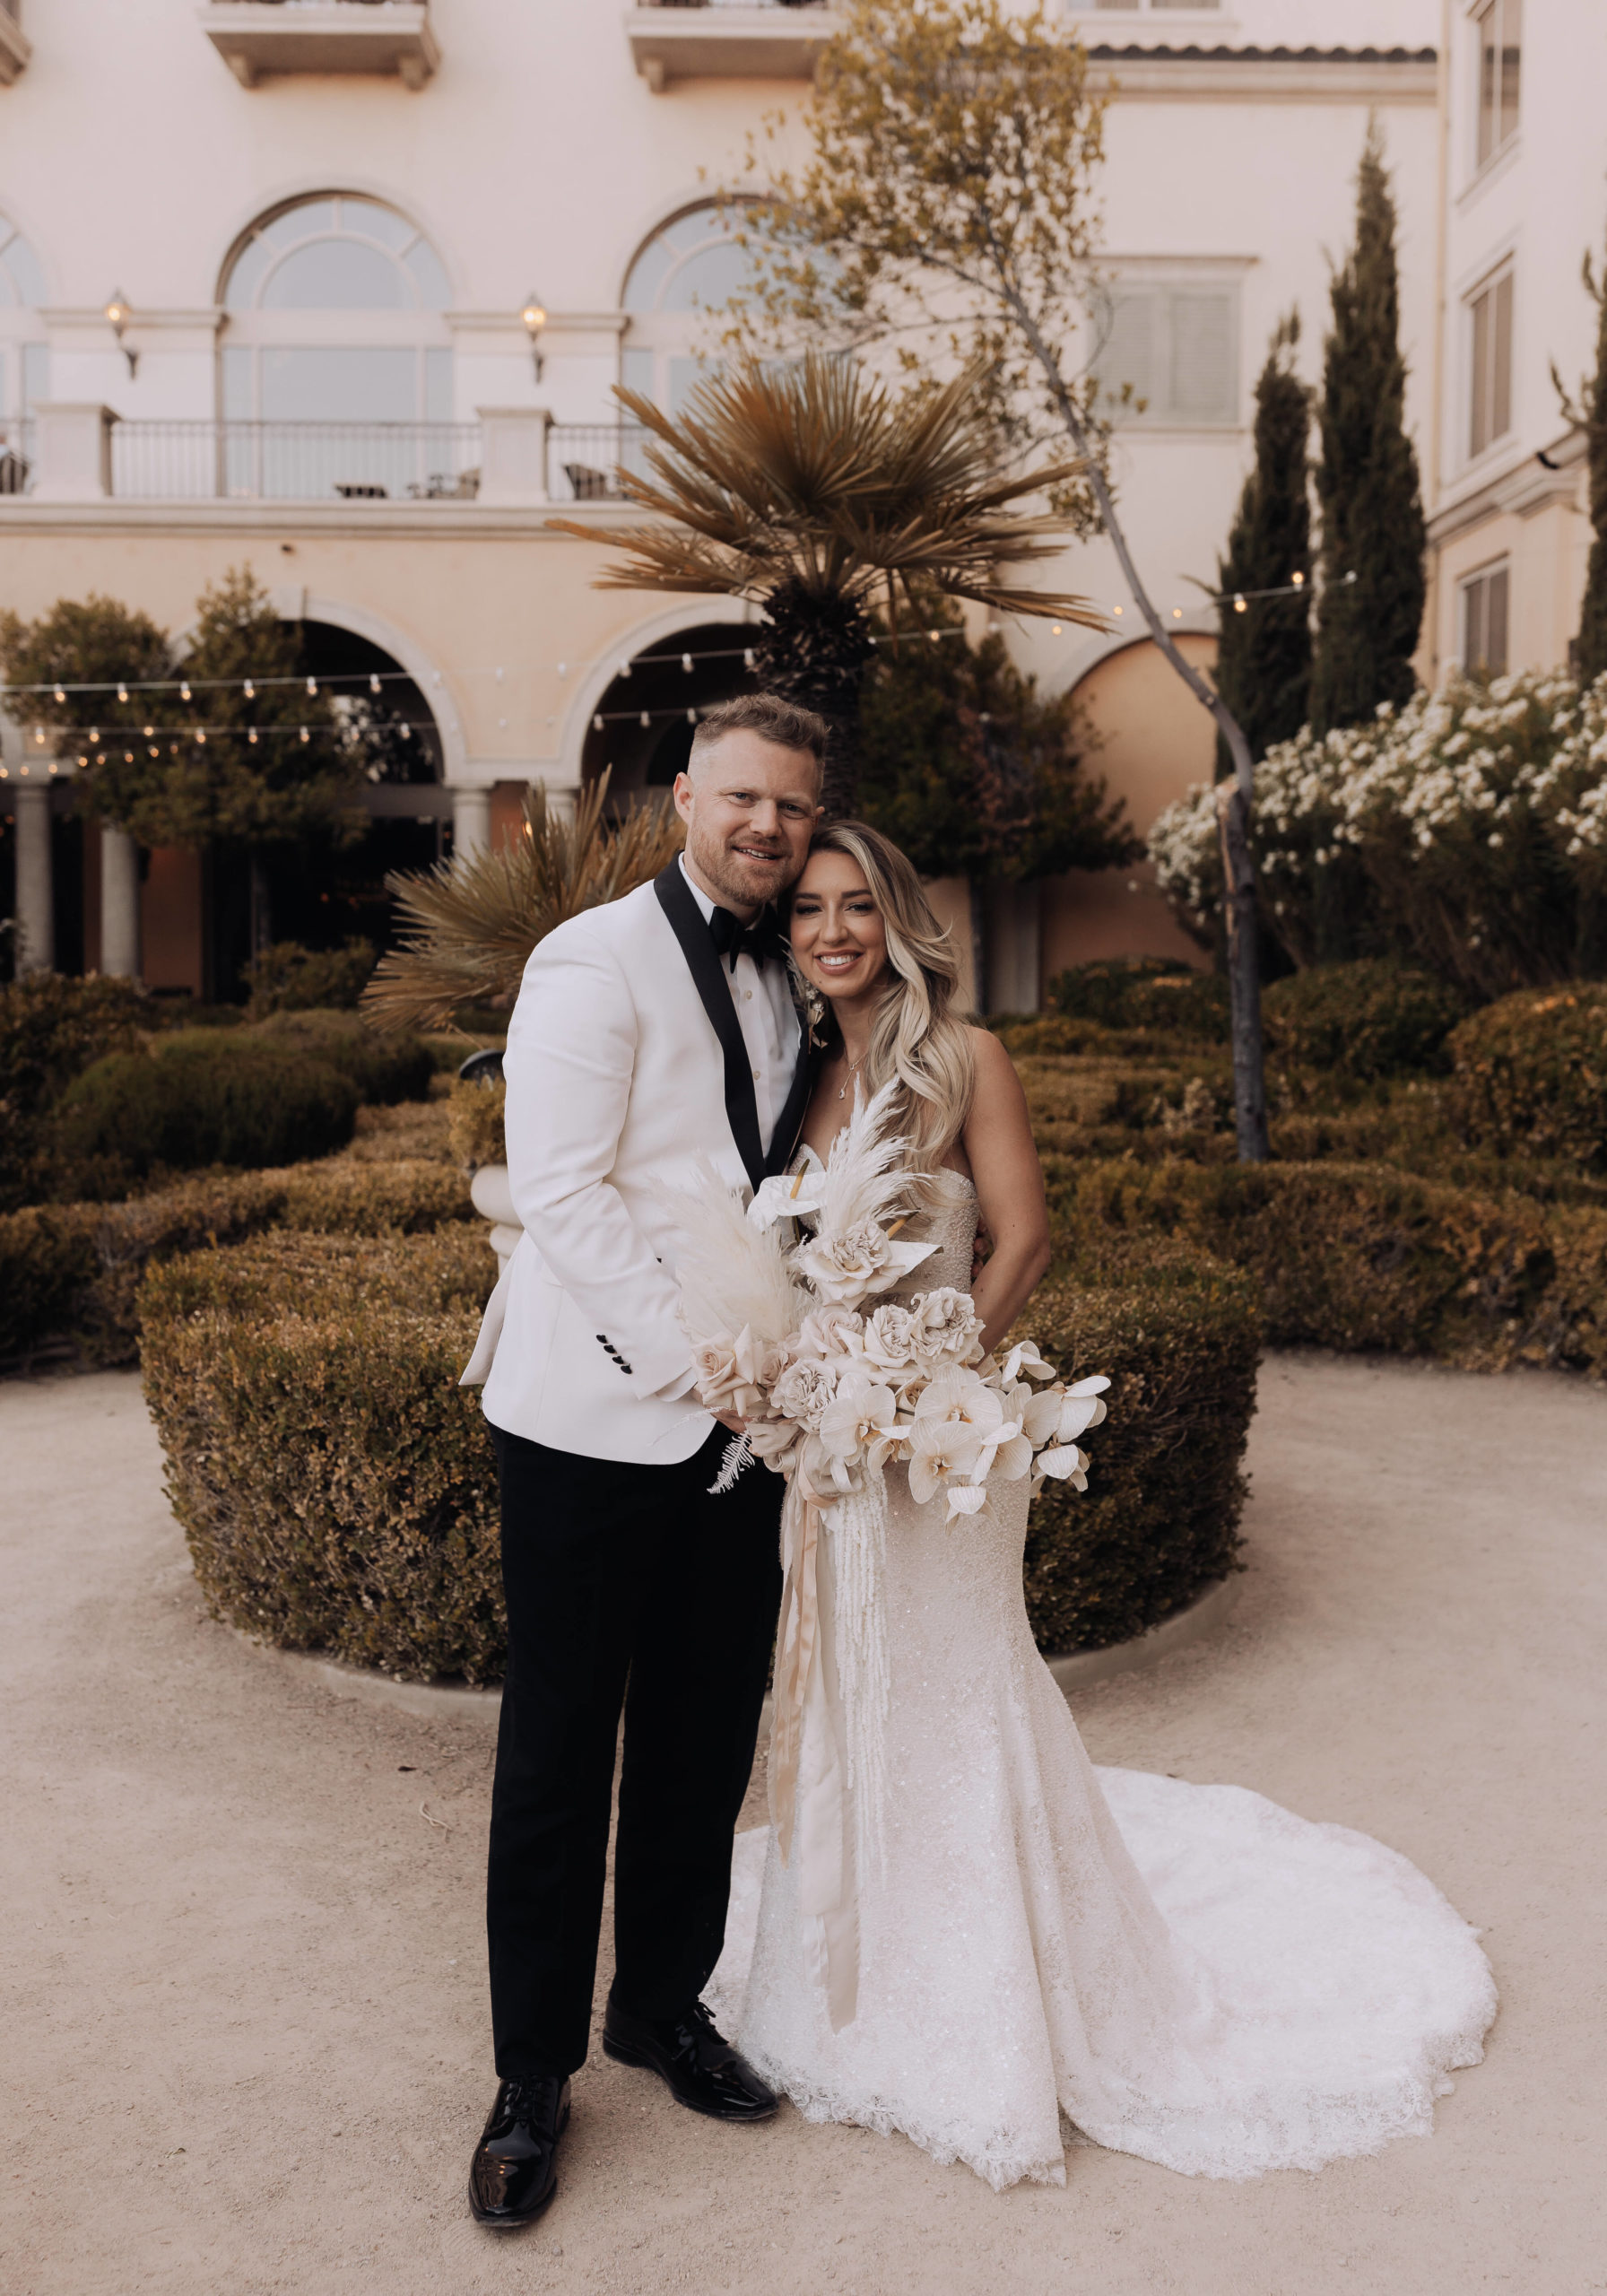 Lake Las Vegas Meets Modern Boho Bride. Newlyweds pose for a photo in the pathway of the beautiful shrubbery, white florals and bistro lighting before heading to reception 